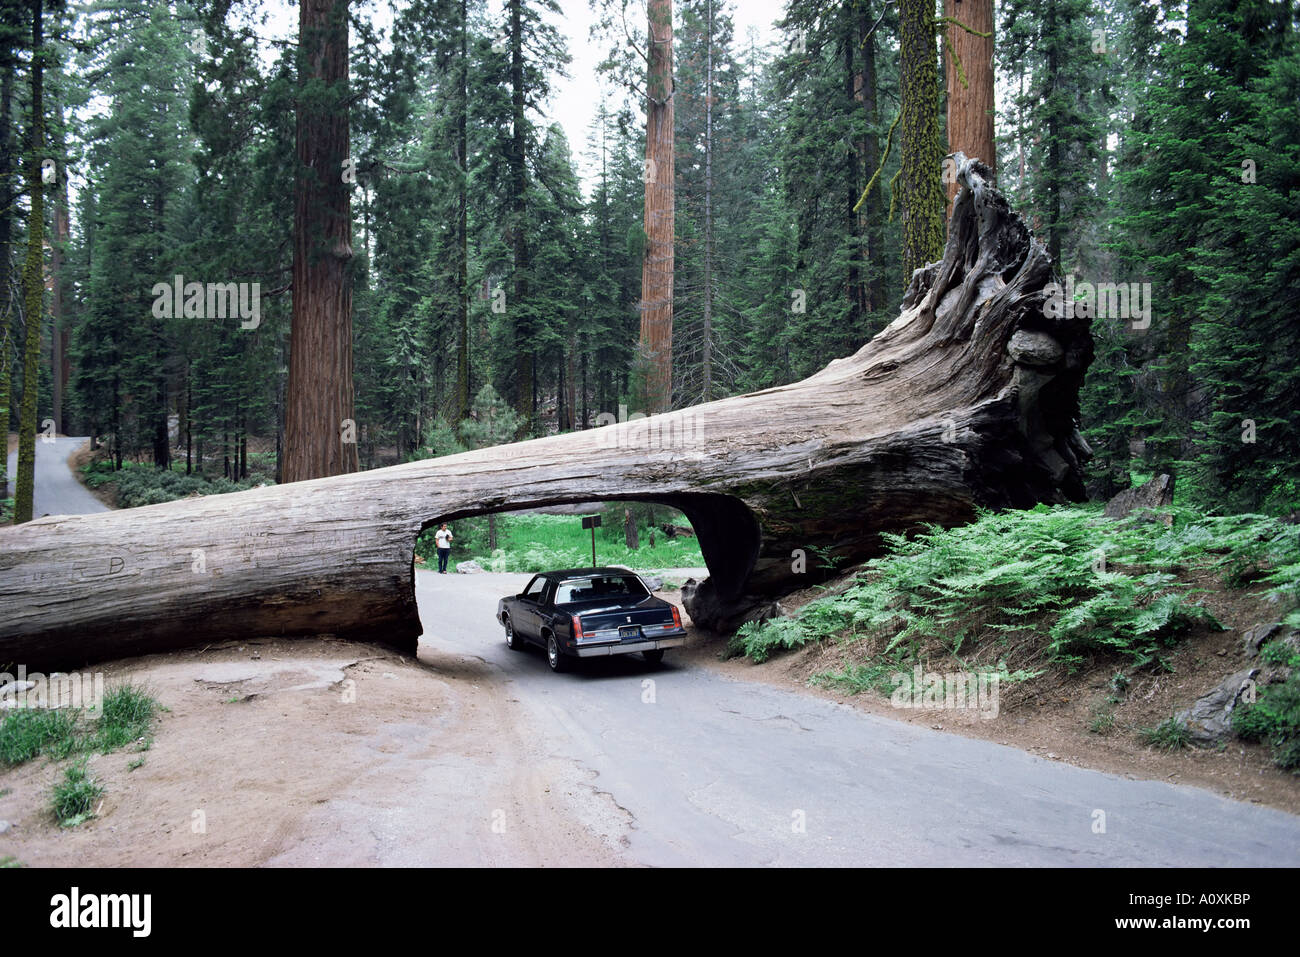 Tunnel Log 275 ft long which fell in 1937 Sequoiadendron giganteum Sequoia National Park California United States of America Stock Photo